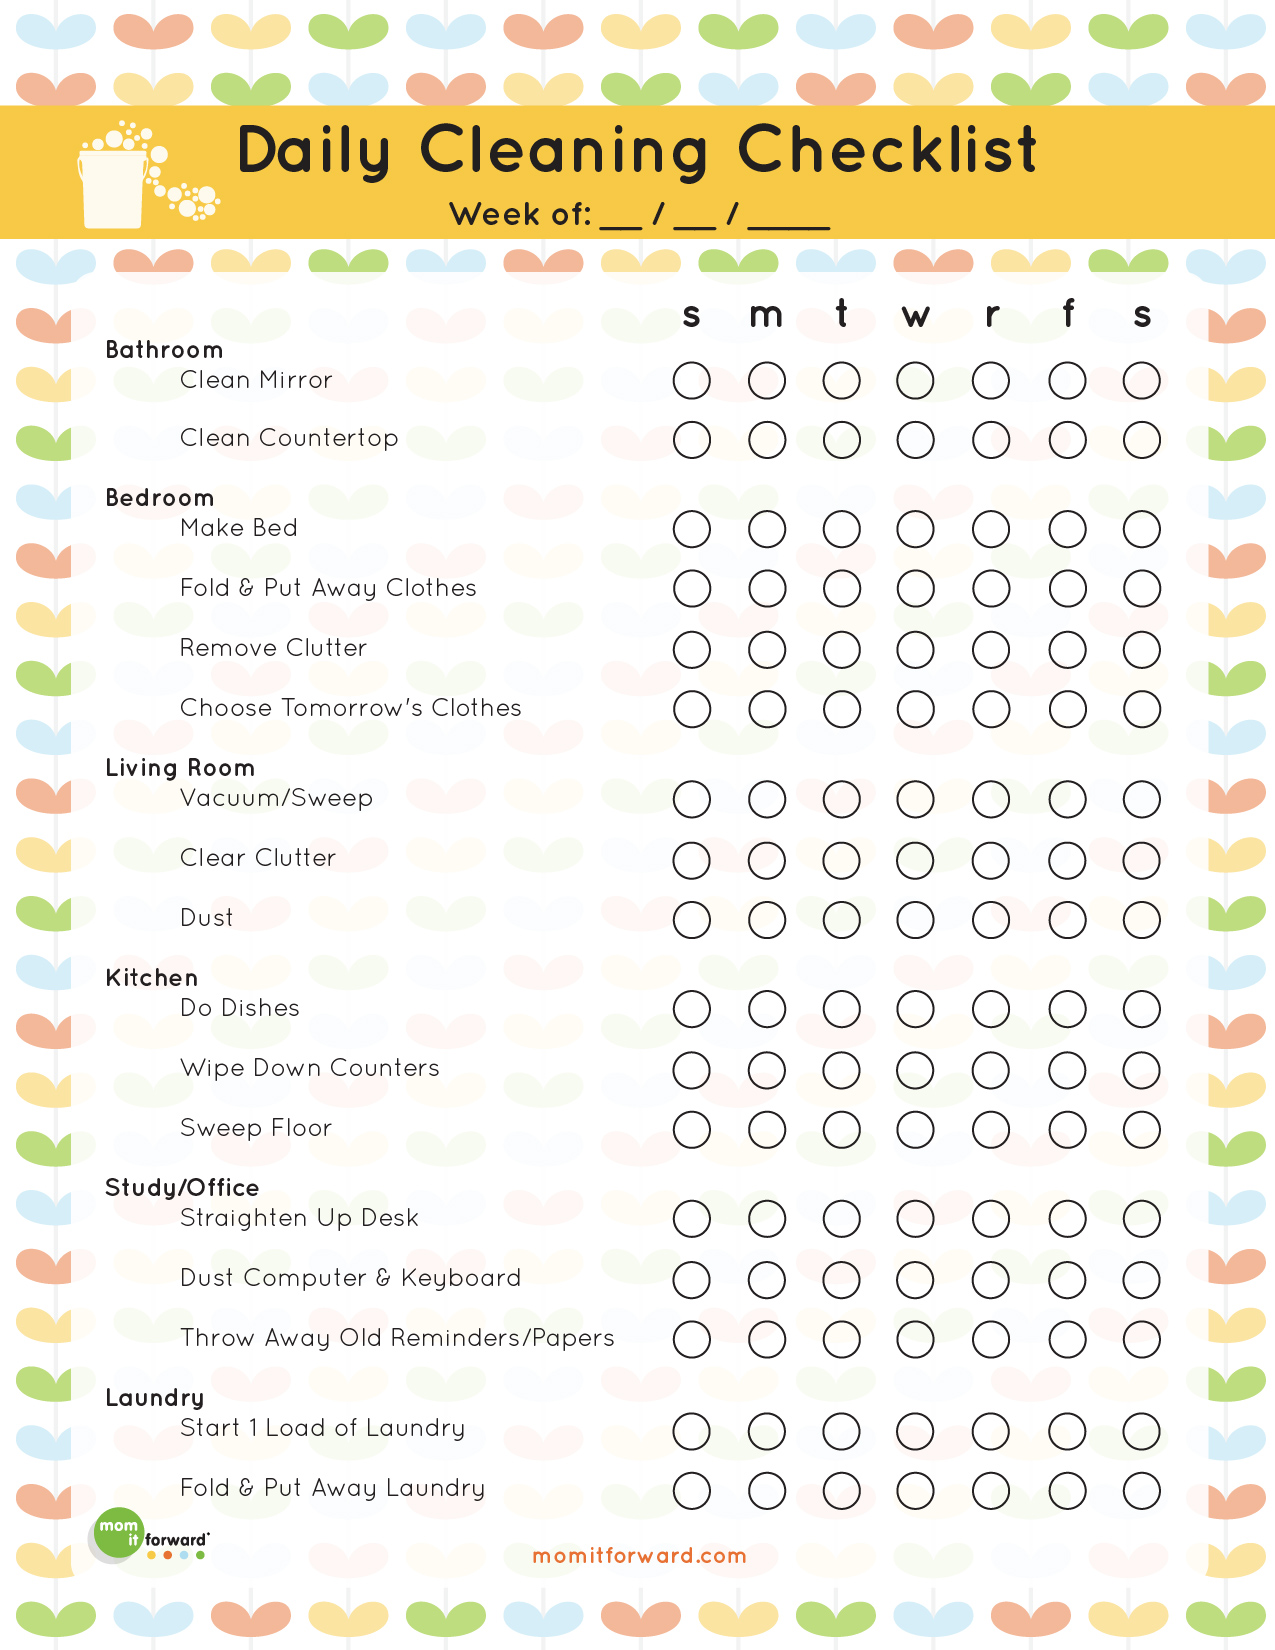 5 Best Images Of Daily House Cleaning Schedule Printable Weekly House